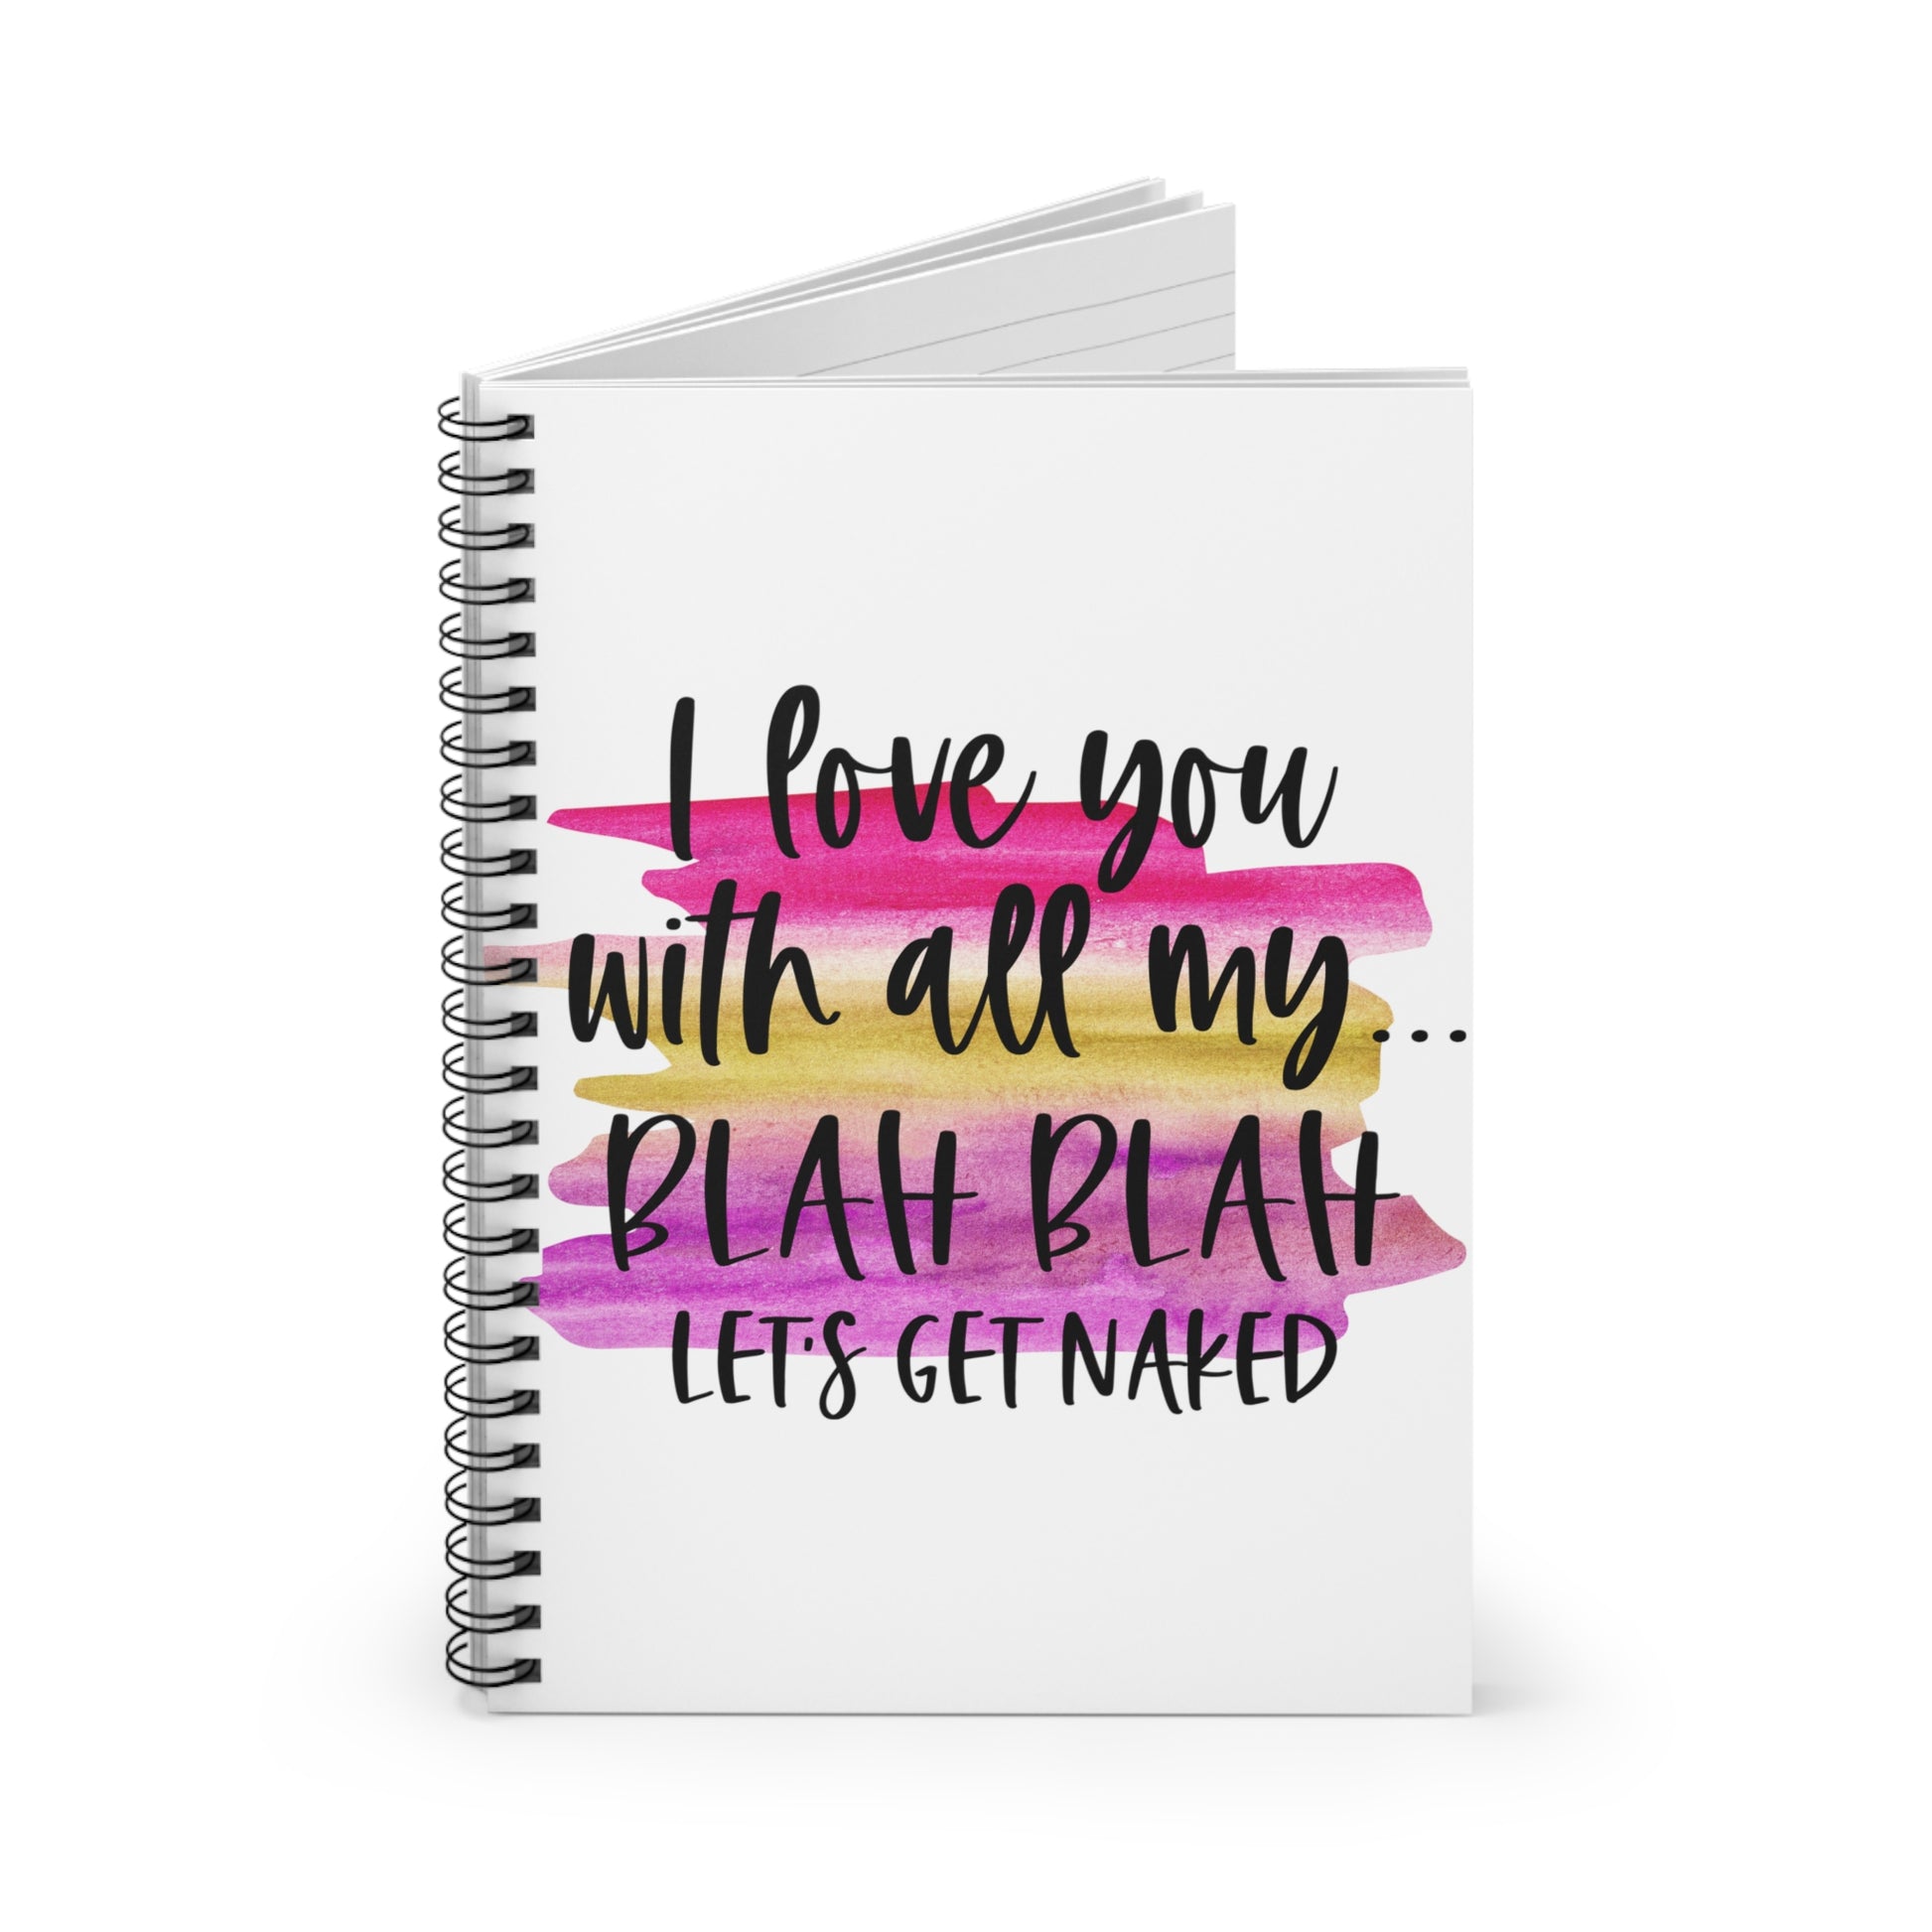 Let's Get Naked: Spiral Notebook - Log Books - Journals - Diaries - and More Custom Printed by TheGlassyLass